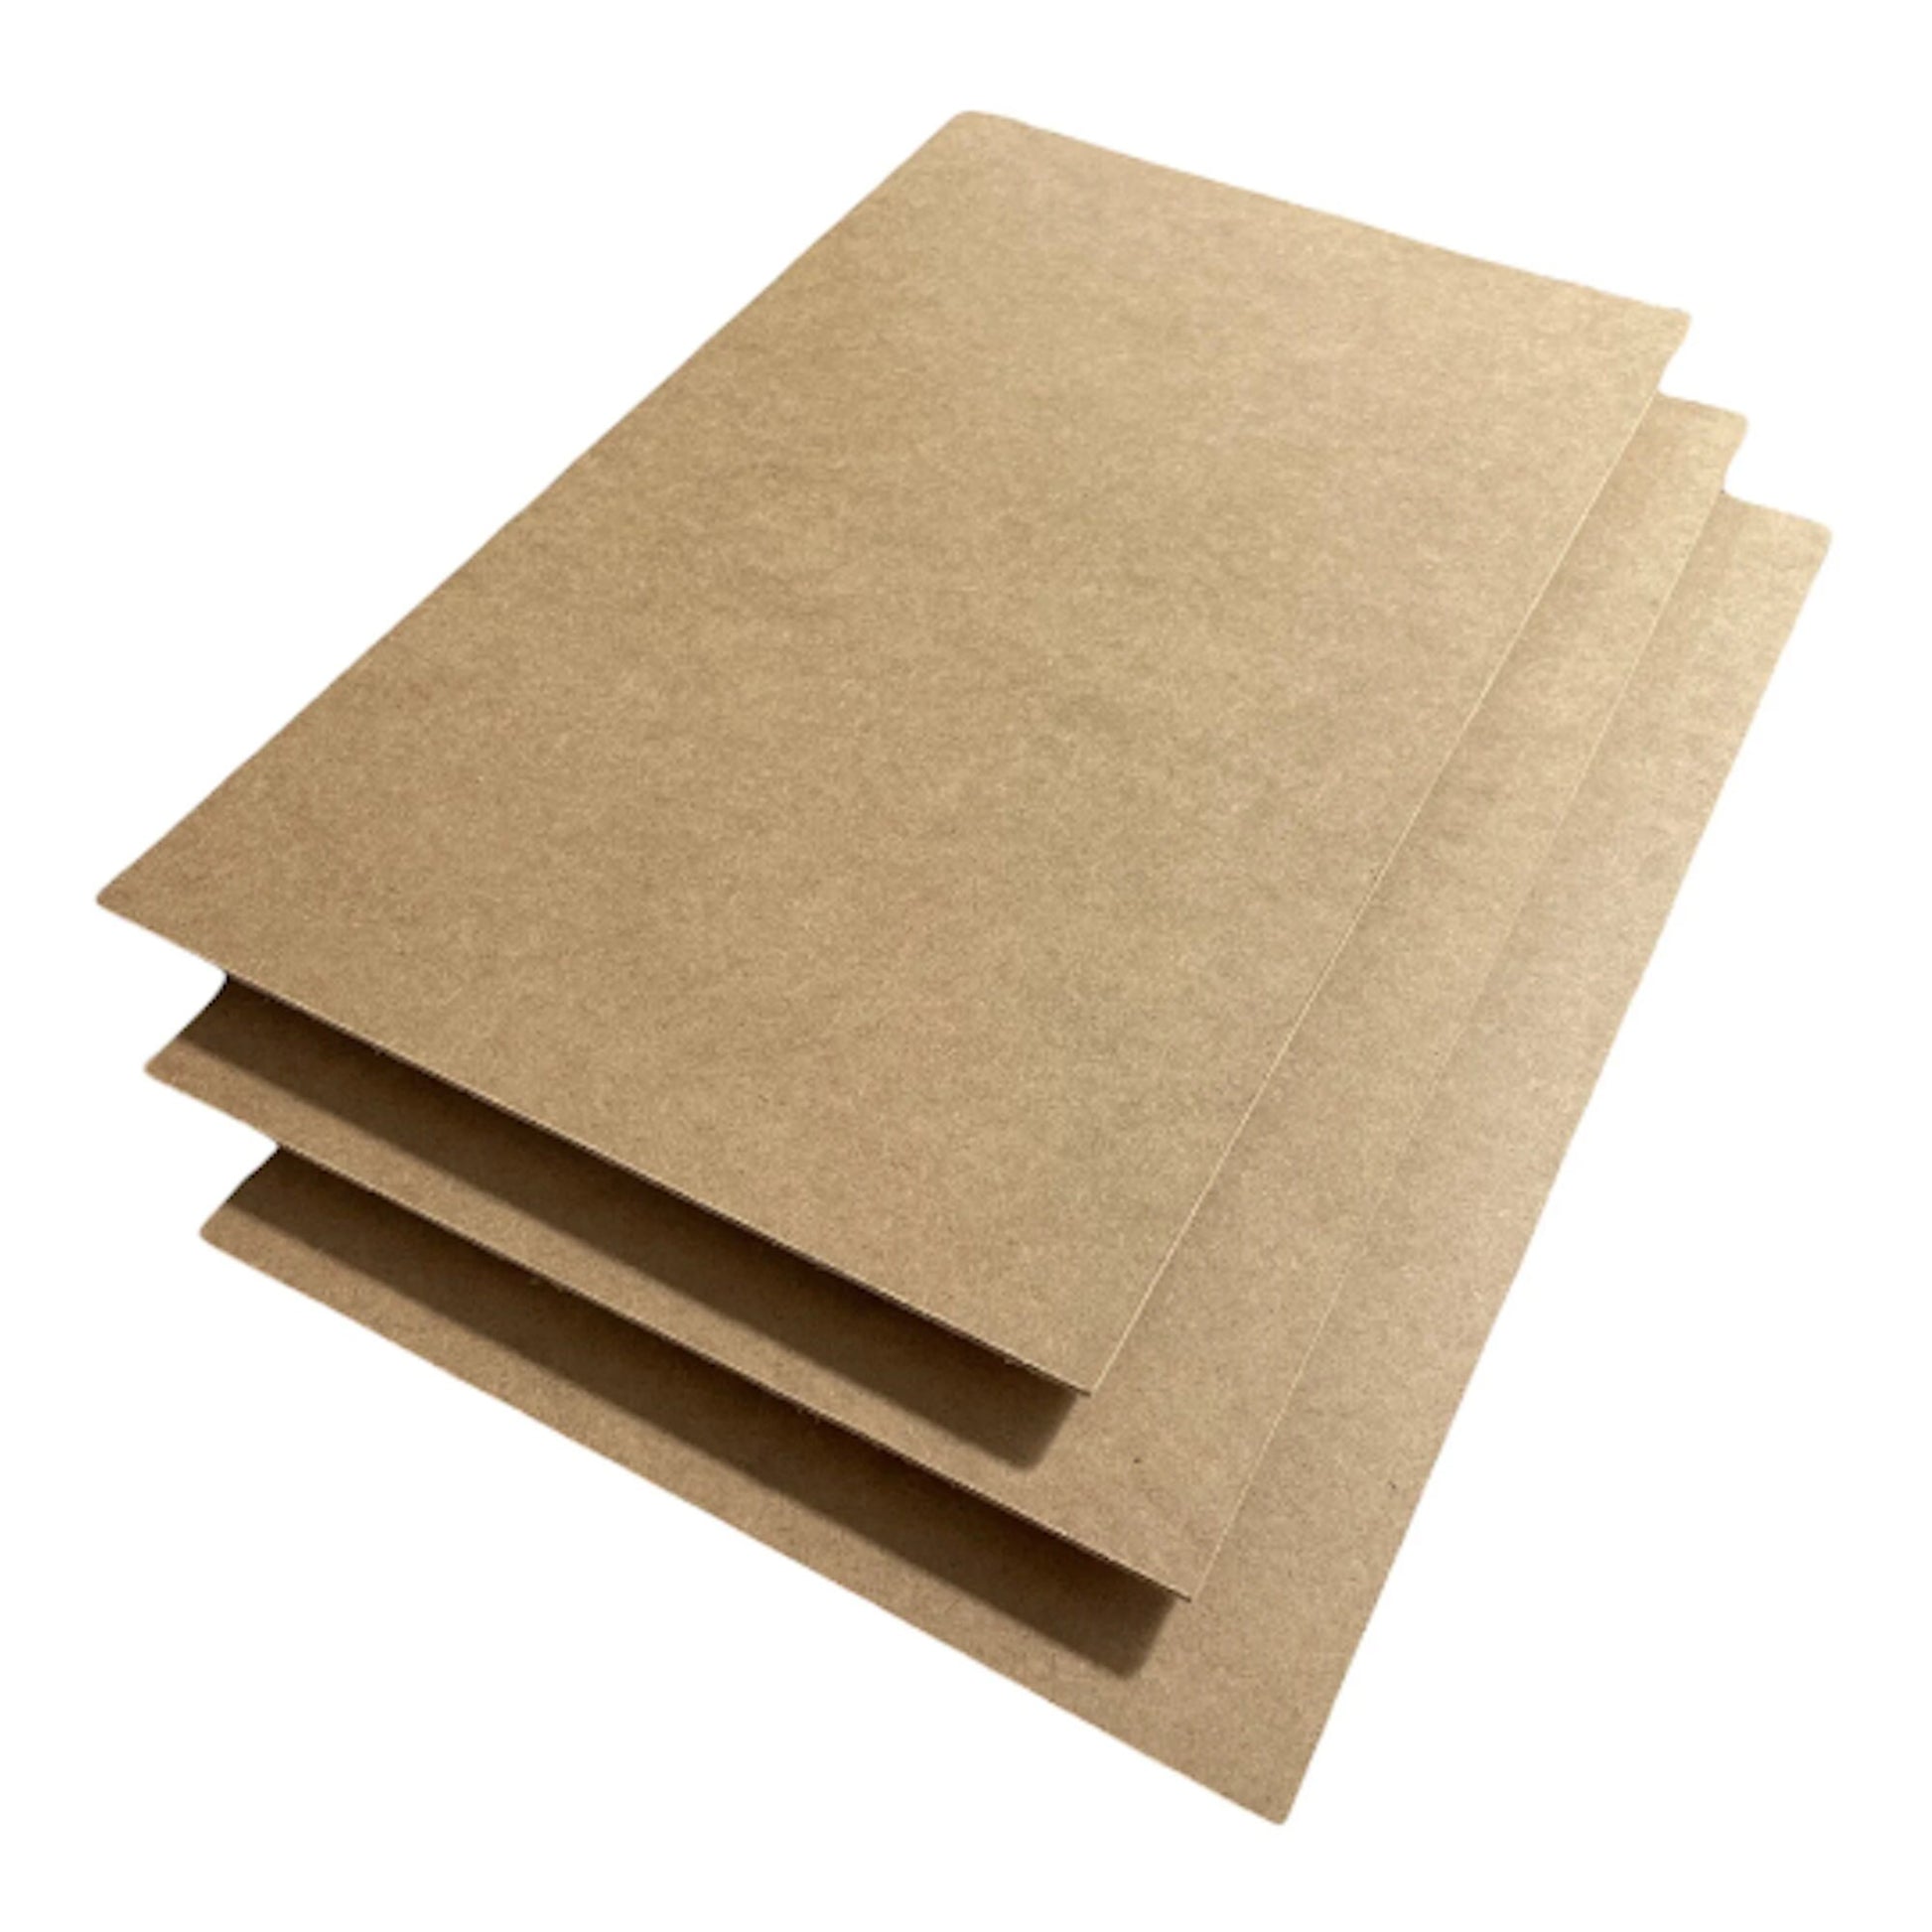 CRAFTIFF Black MDF Board 1/8 inch Thick, A3 Size Chipboard - 3 Pack :  : Office Products